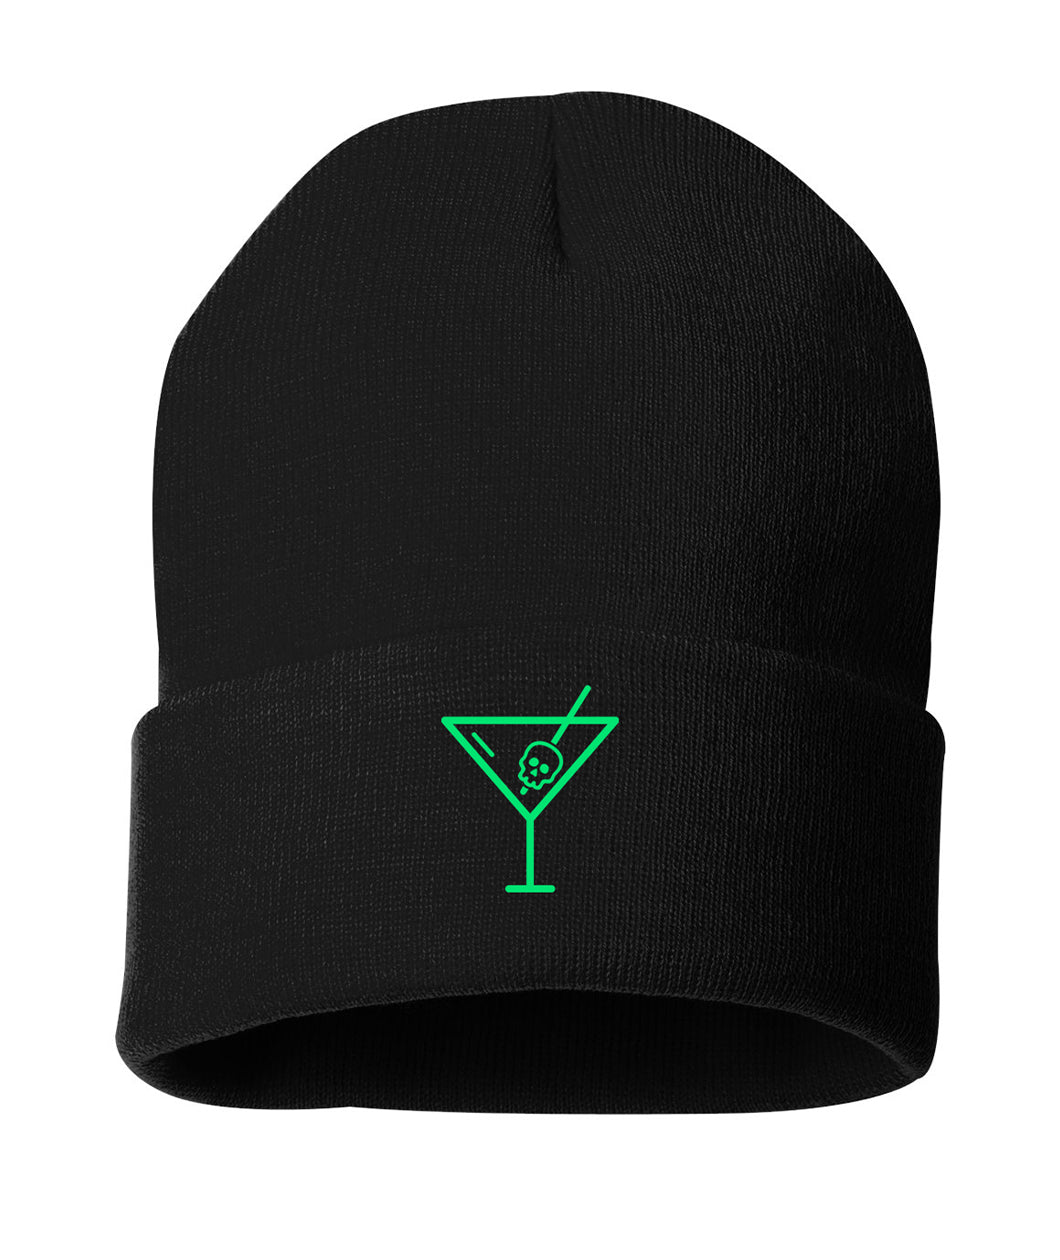 A black beanie with a green outline vector drawing of a marntini glass. A green skull with a green toothpick going through it is inside the glass - from Spirits